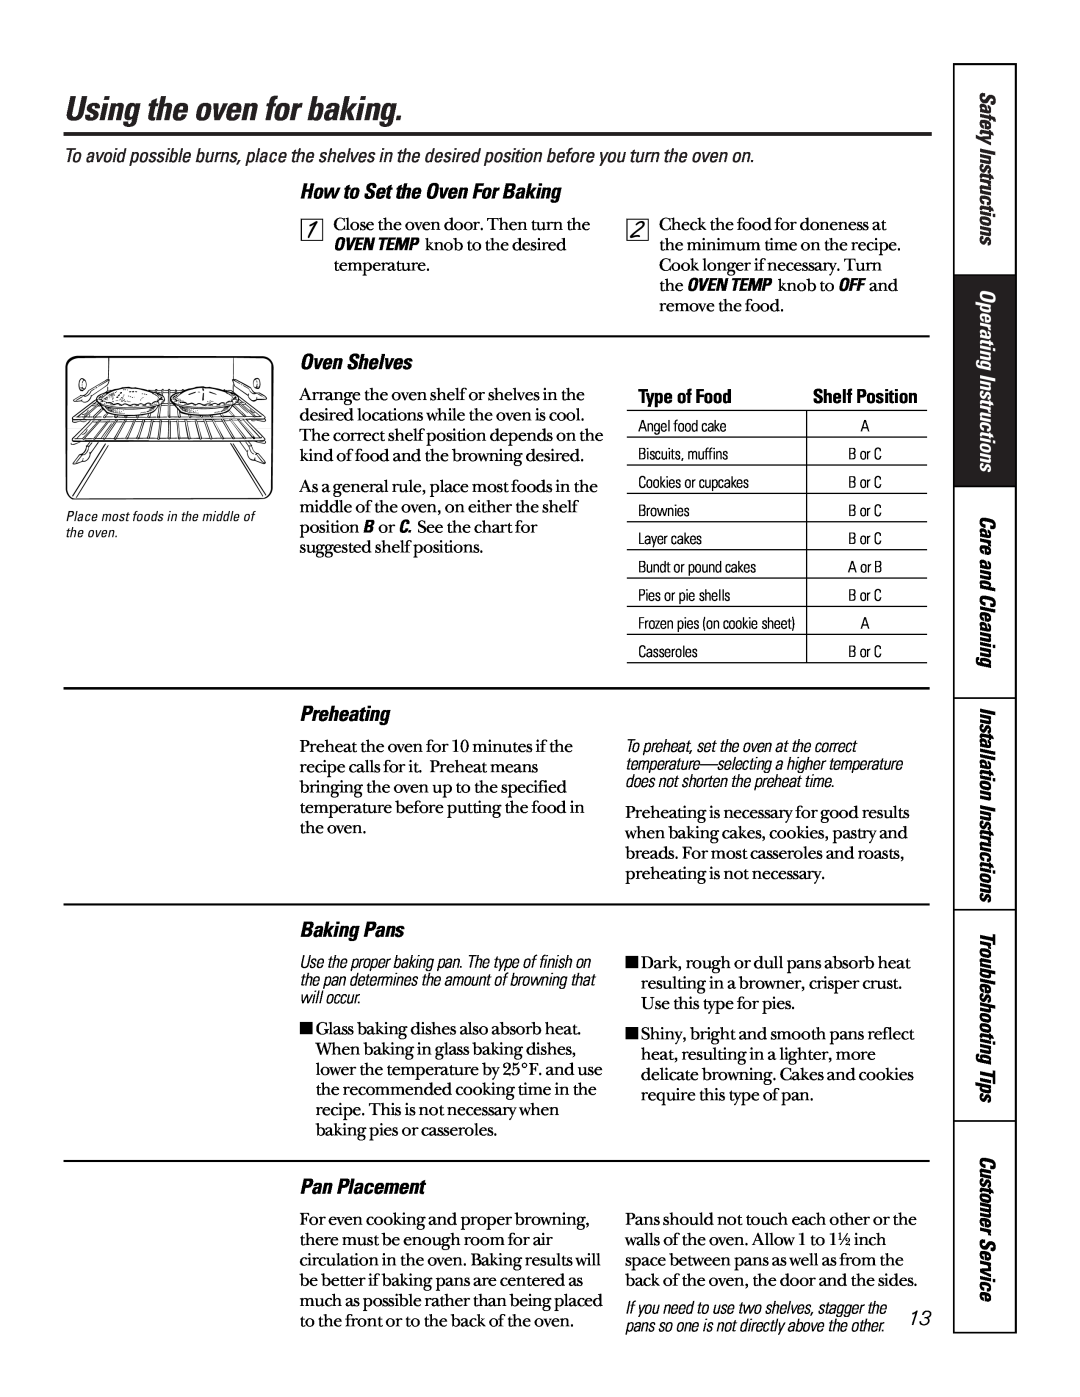 GE 164D3333P185-1 Using the oven for baking, How to Set the Oven For Baking, Instructions Care and Cleaning, Preheating 